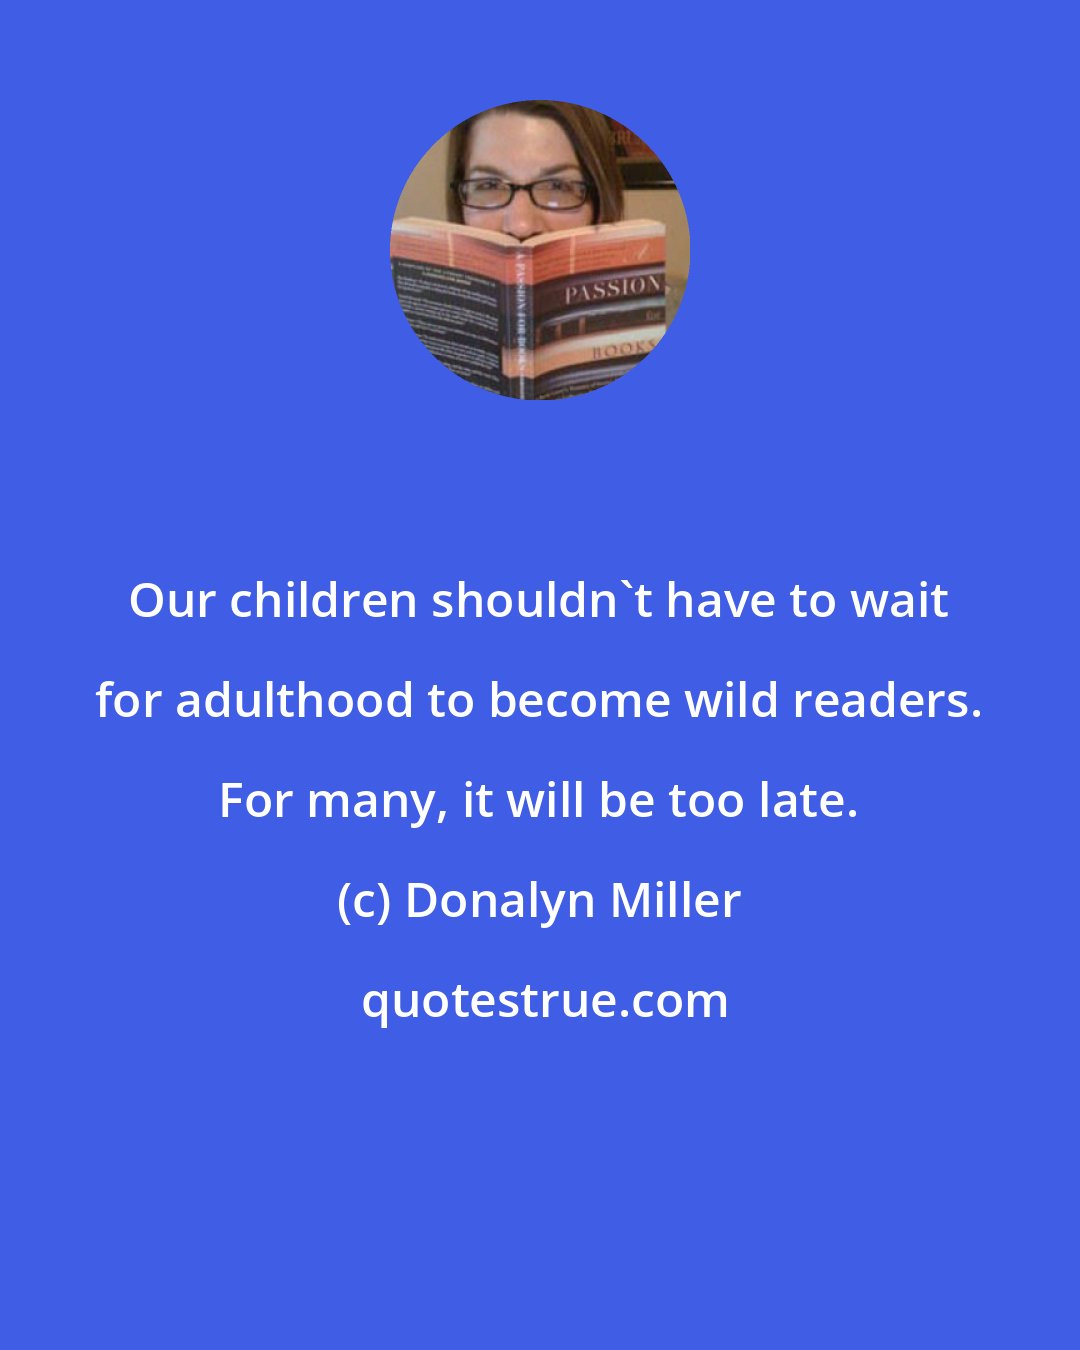 Donalyn Miller: Our children shouldn't have to wait for adulthood to become wild readers. For many, it will be too late.